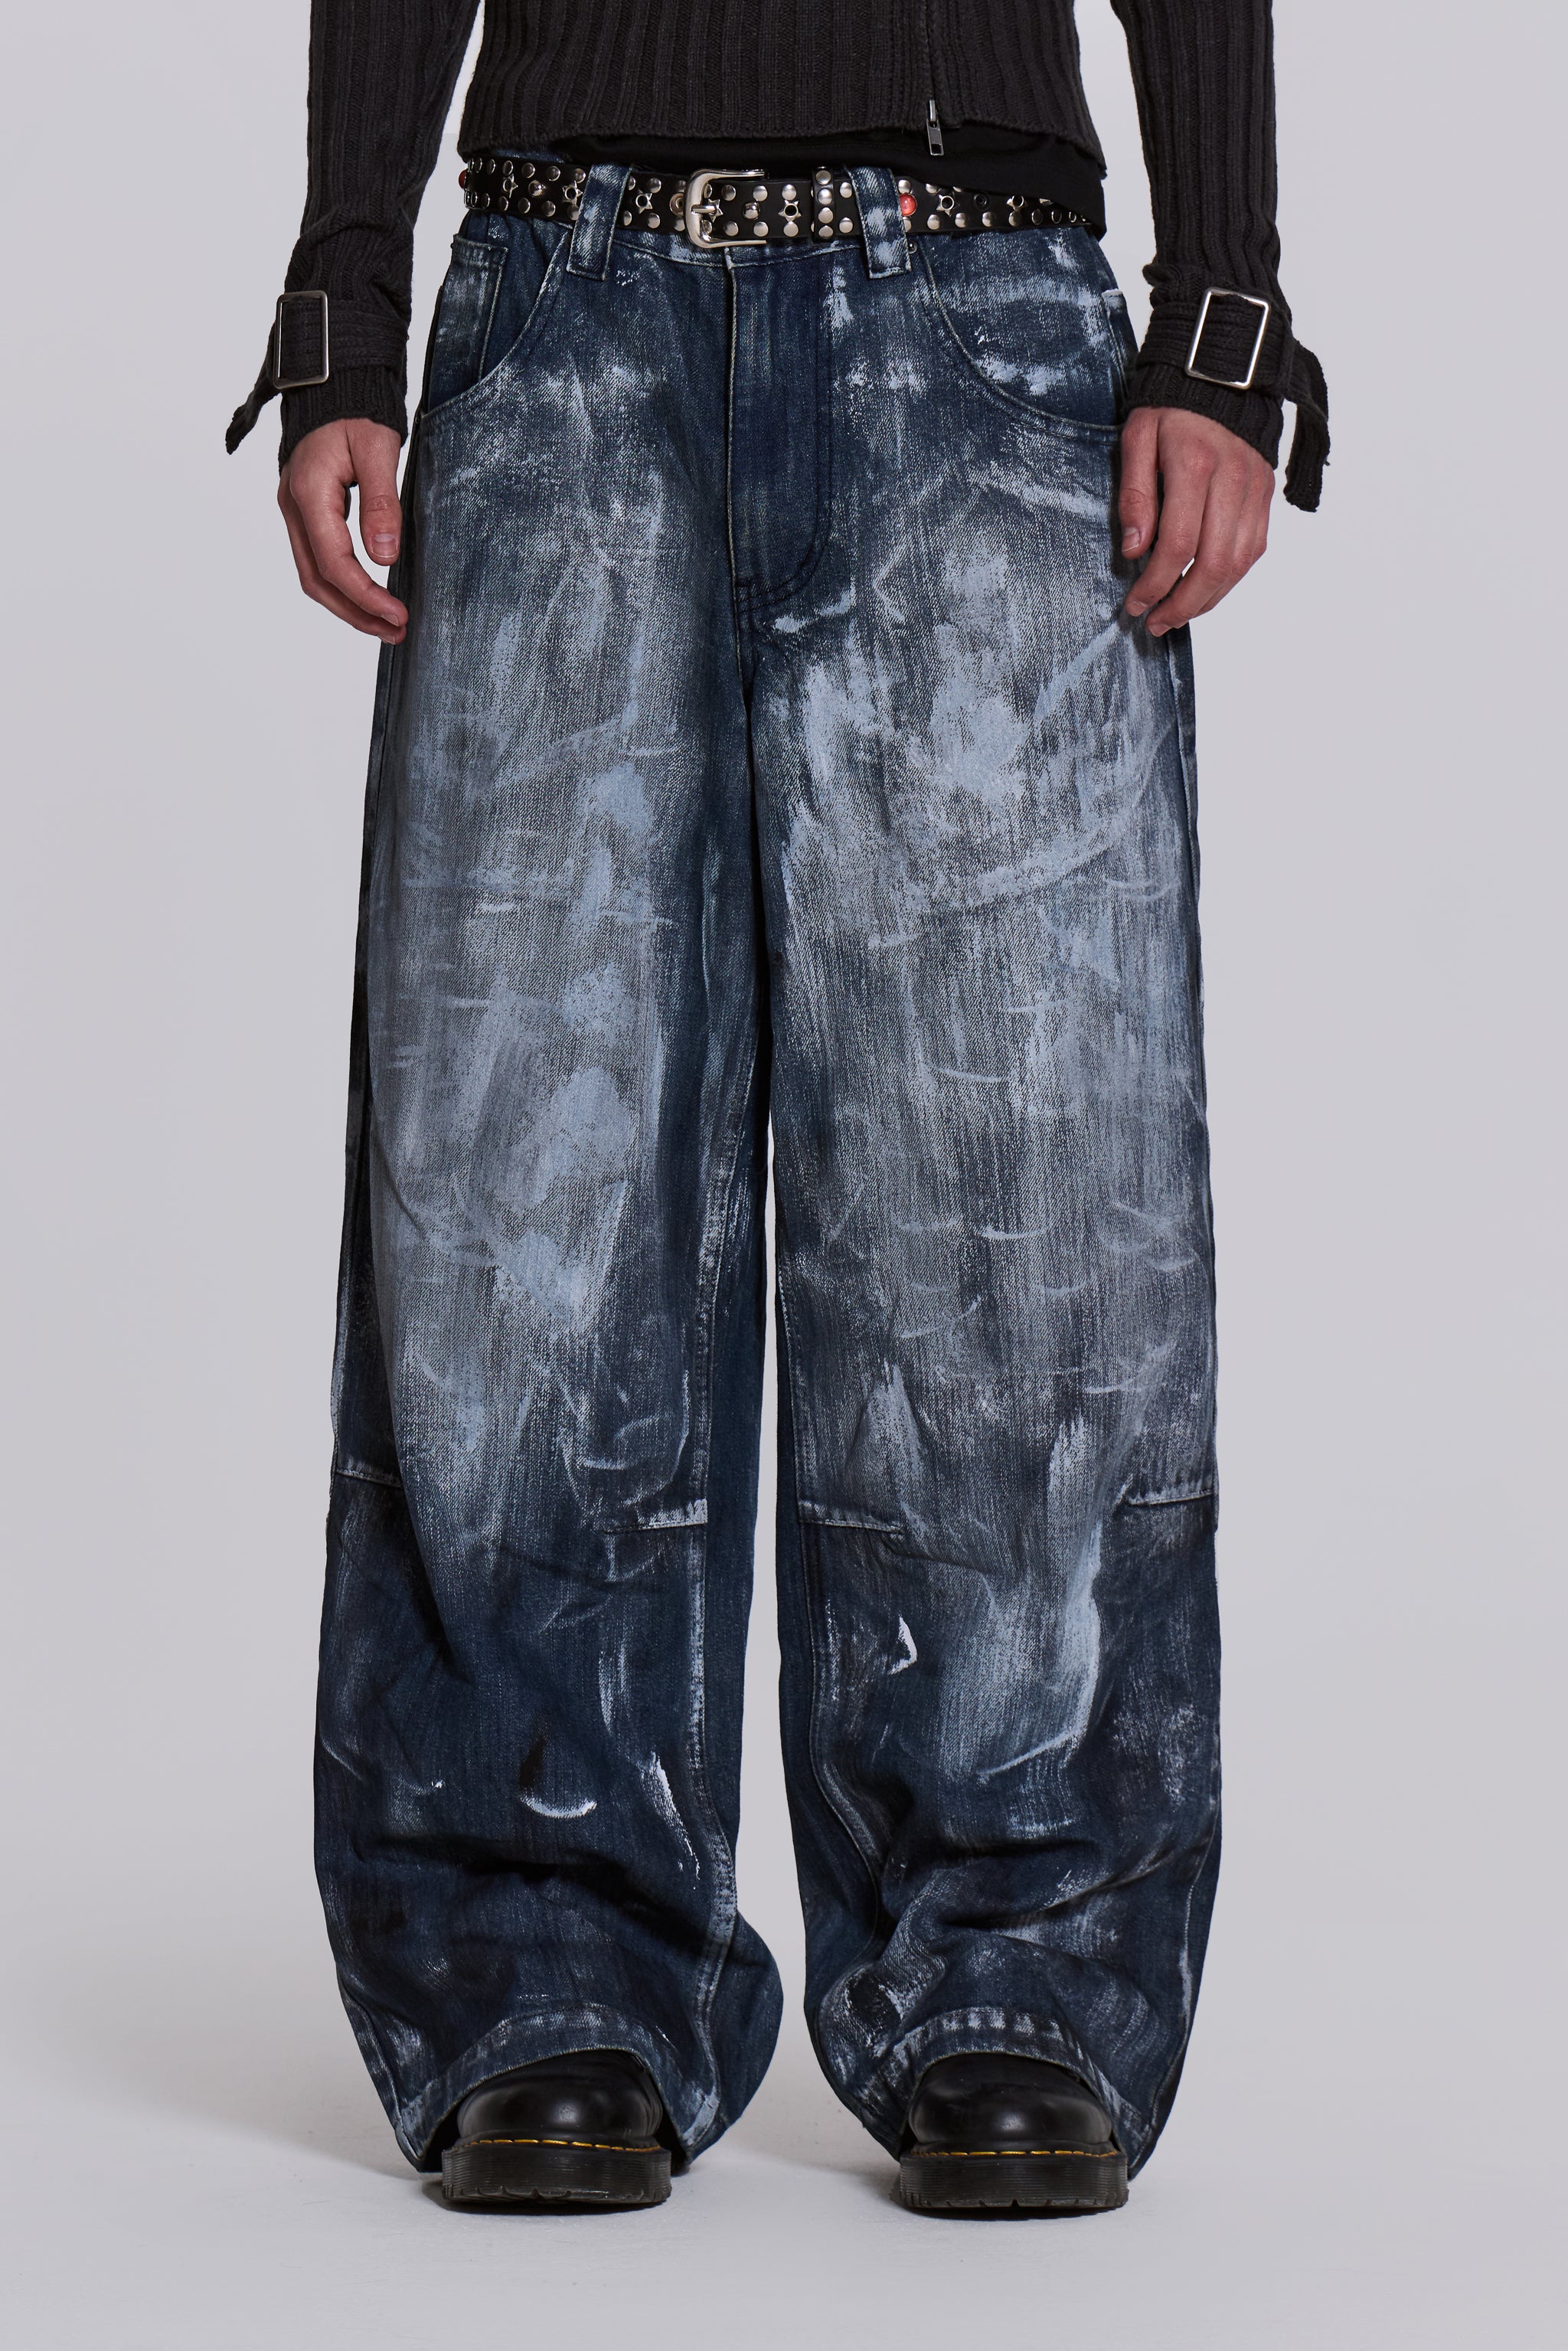 Jaded London Blue Painter Colossus Jeans